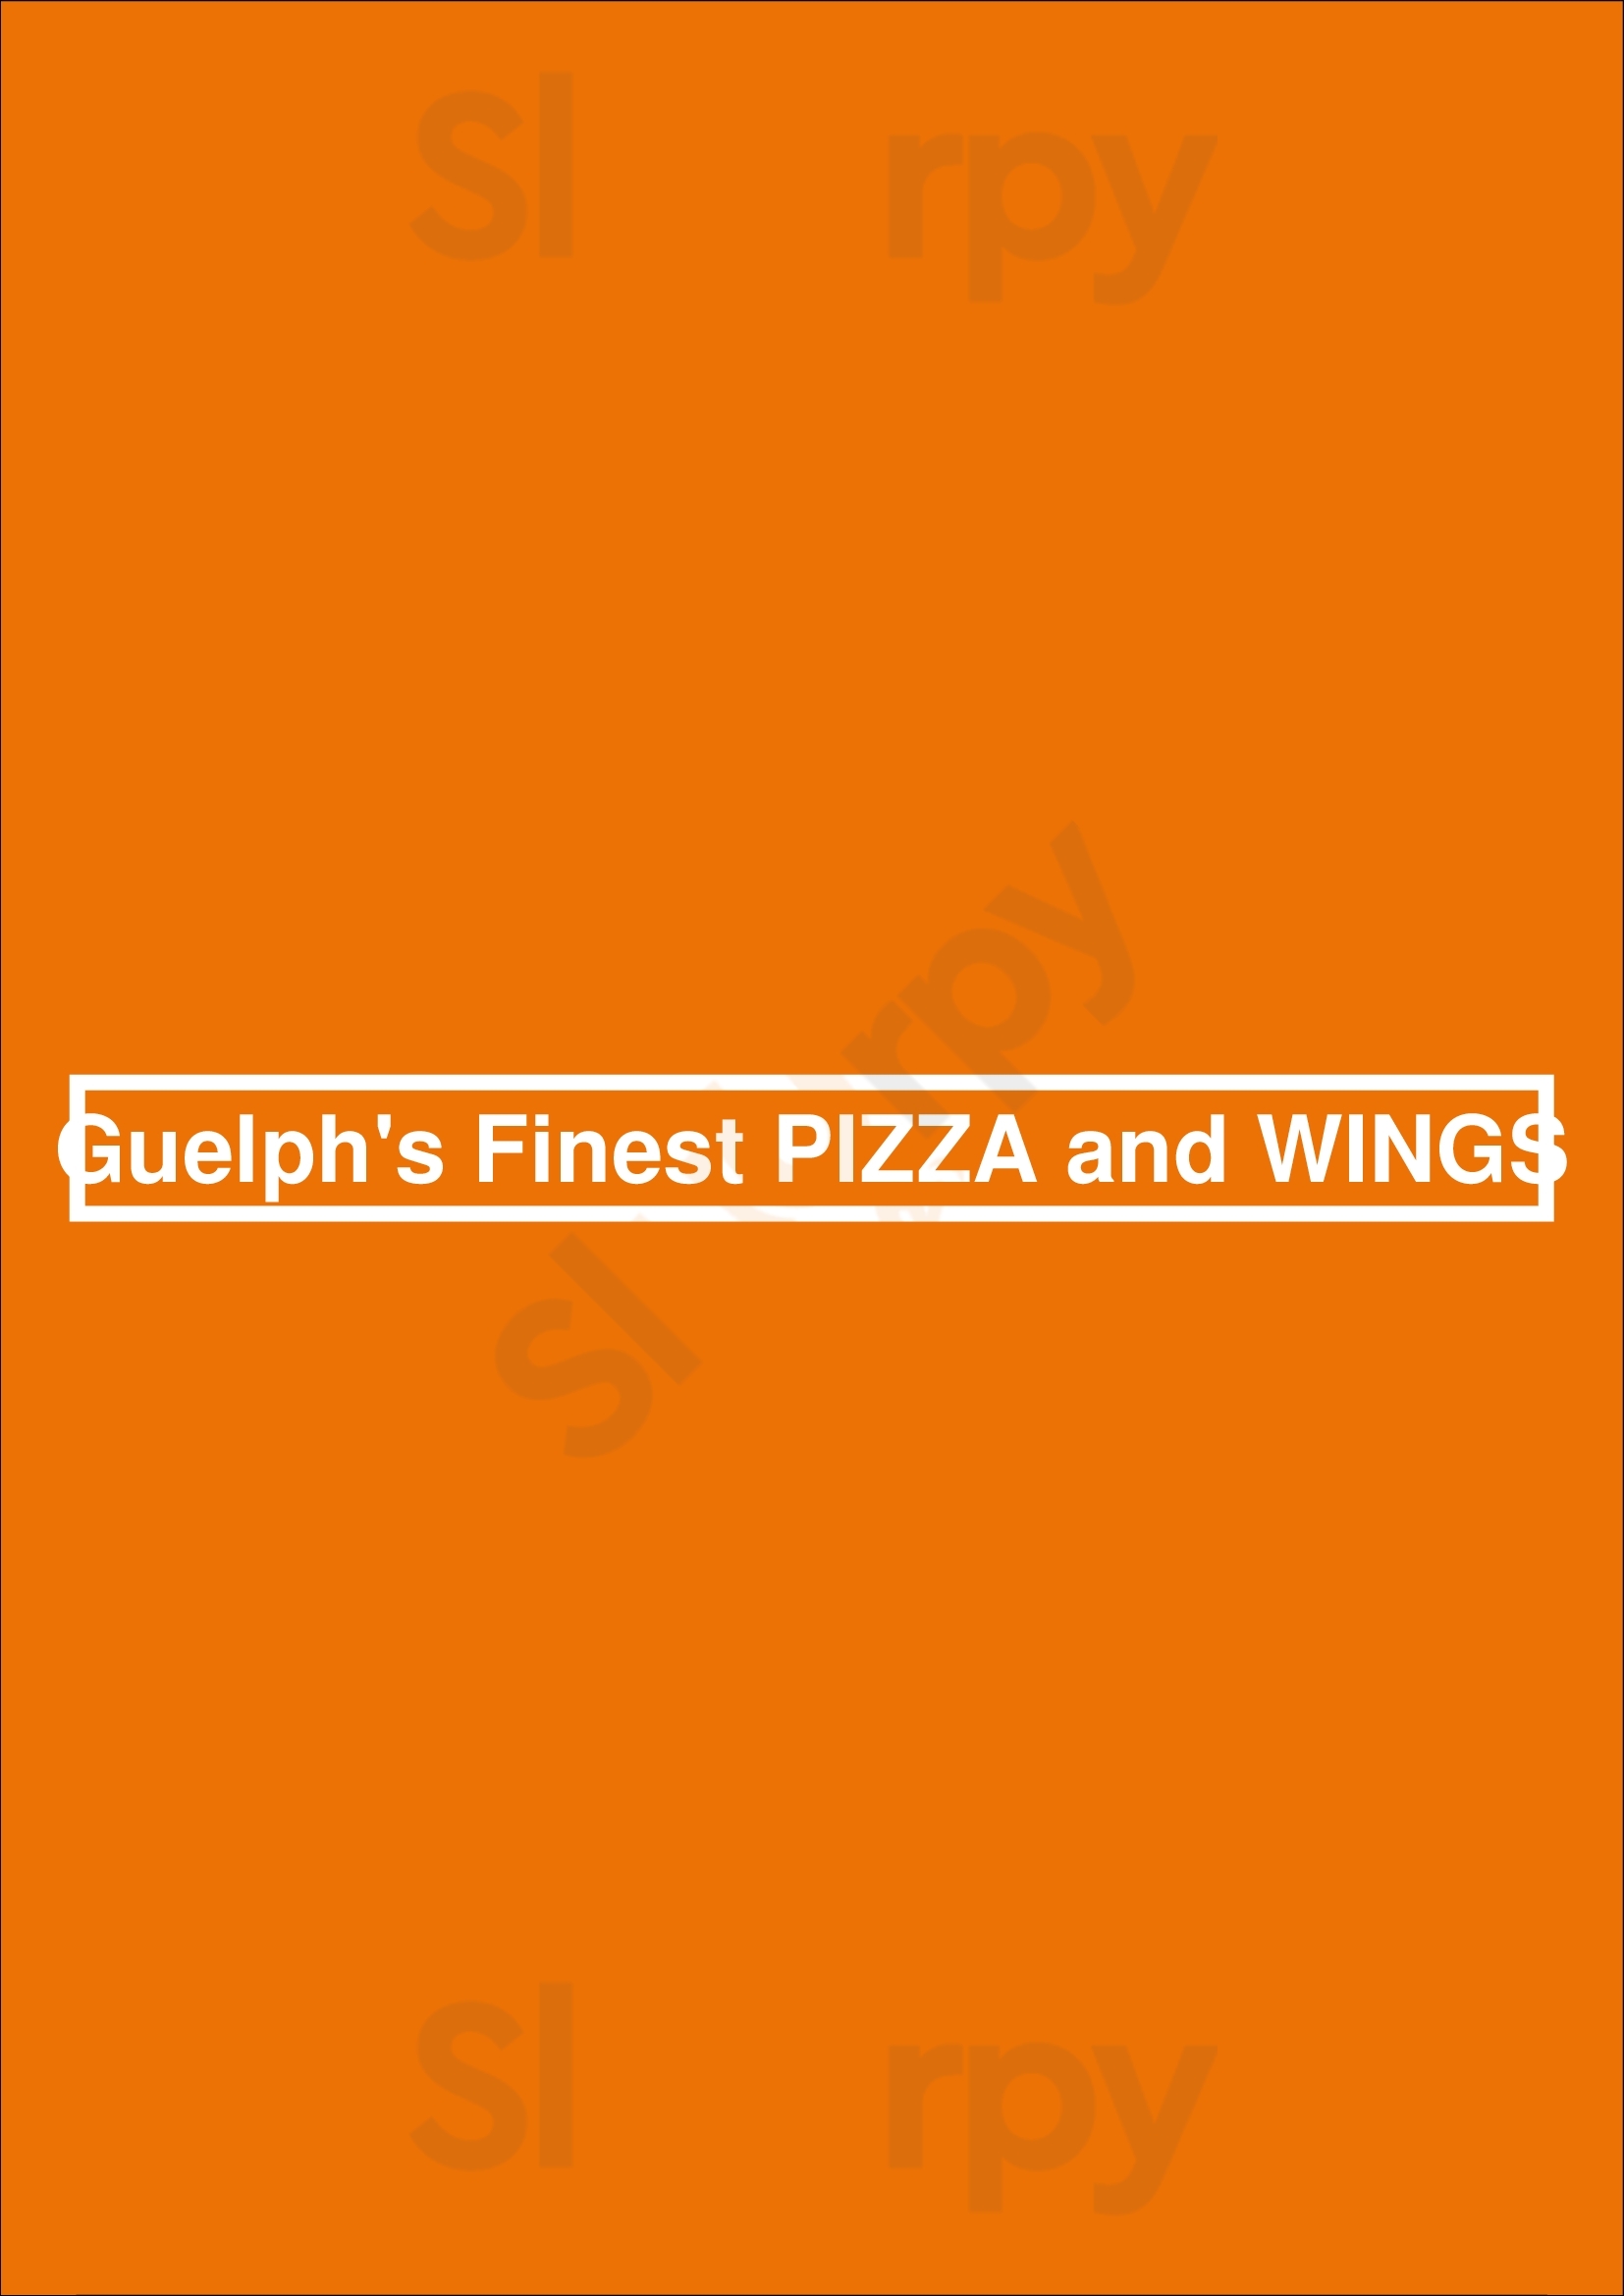 Guelph's Finest Pizza And Wings Guelph Menu - 1